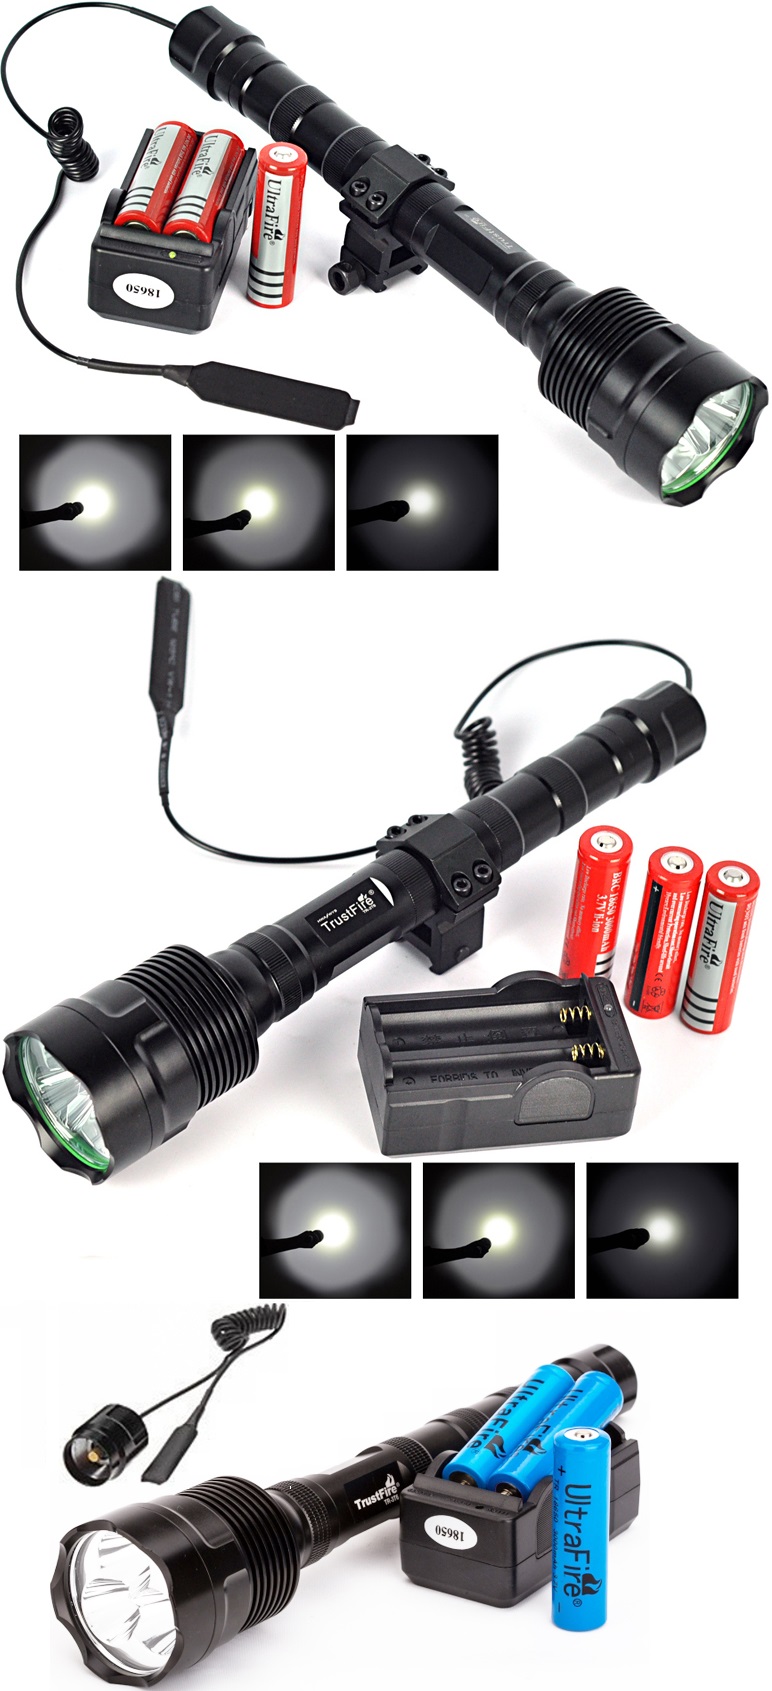 Trustfire-6000Lm-Powerful-XML-3xT6-LED-Tactical-Flashlight-18650-Lantern-5Mode-Torch-Battery-Charger-Remote-Switch